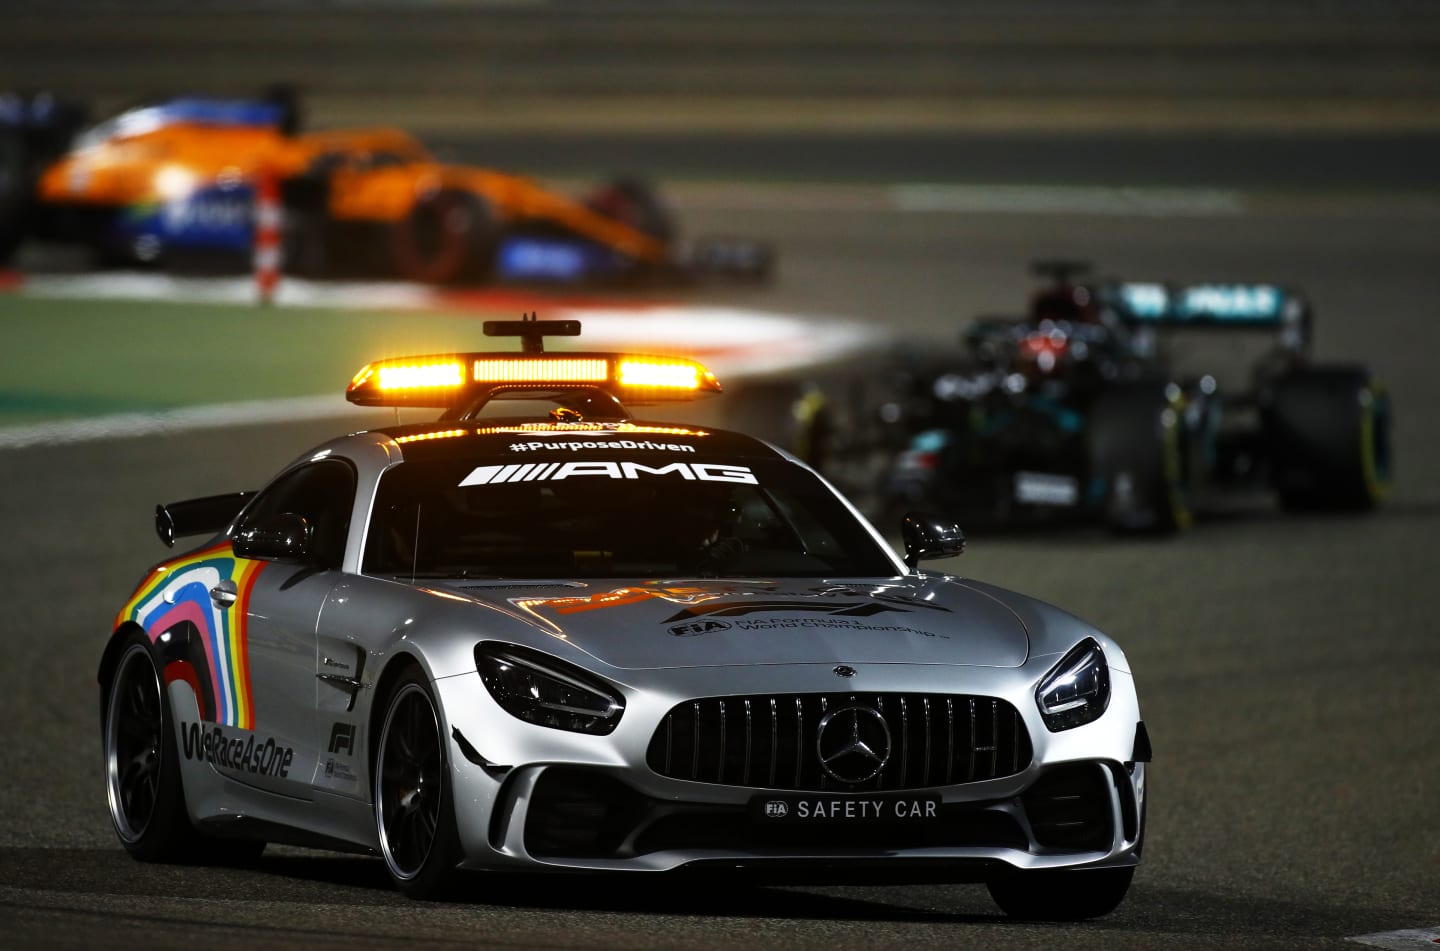 BAHRAIN, BAHRAIN - DECEMBER 06: The FIA Safety Car leads the field during the F1 Grand Prix of